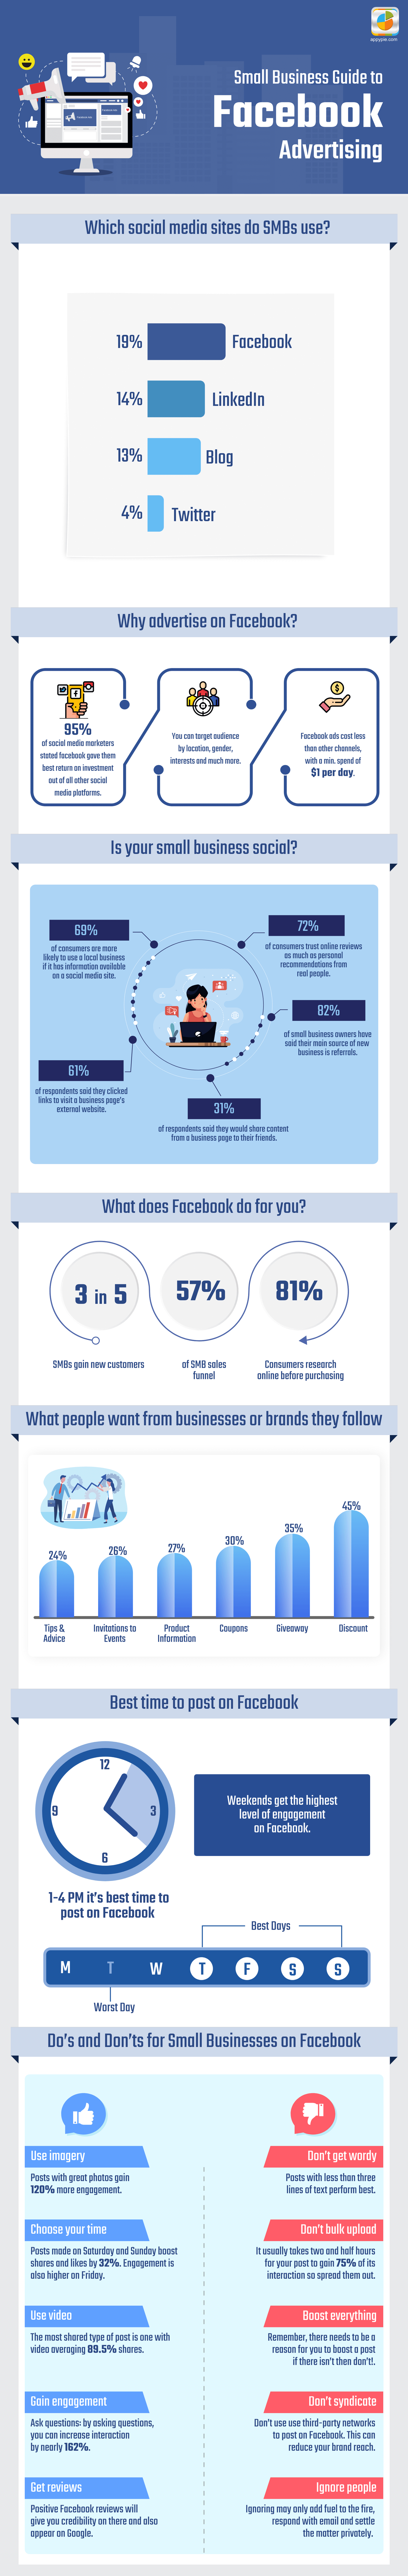 Small Business Guide to Facebook Advertising-infographic (1)